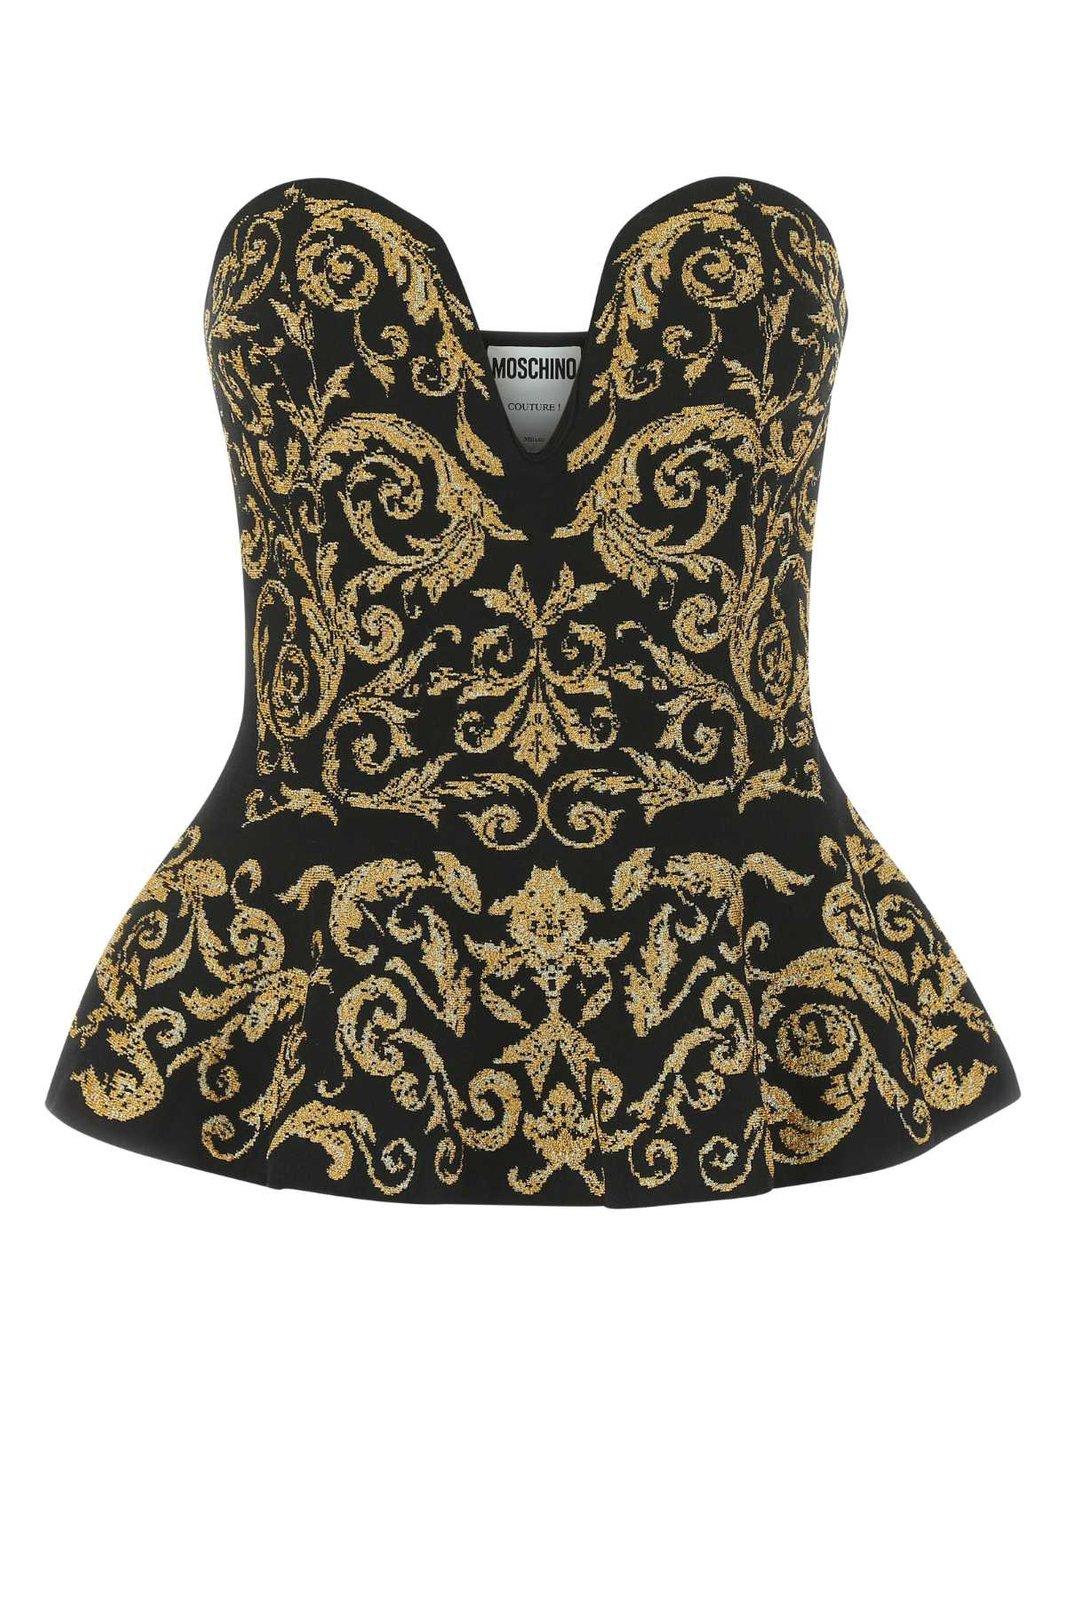 Moschino Patterned-jacquard Sweetheart Neck Top